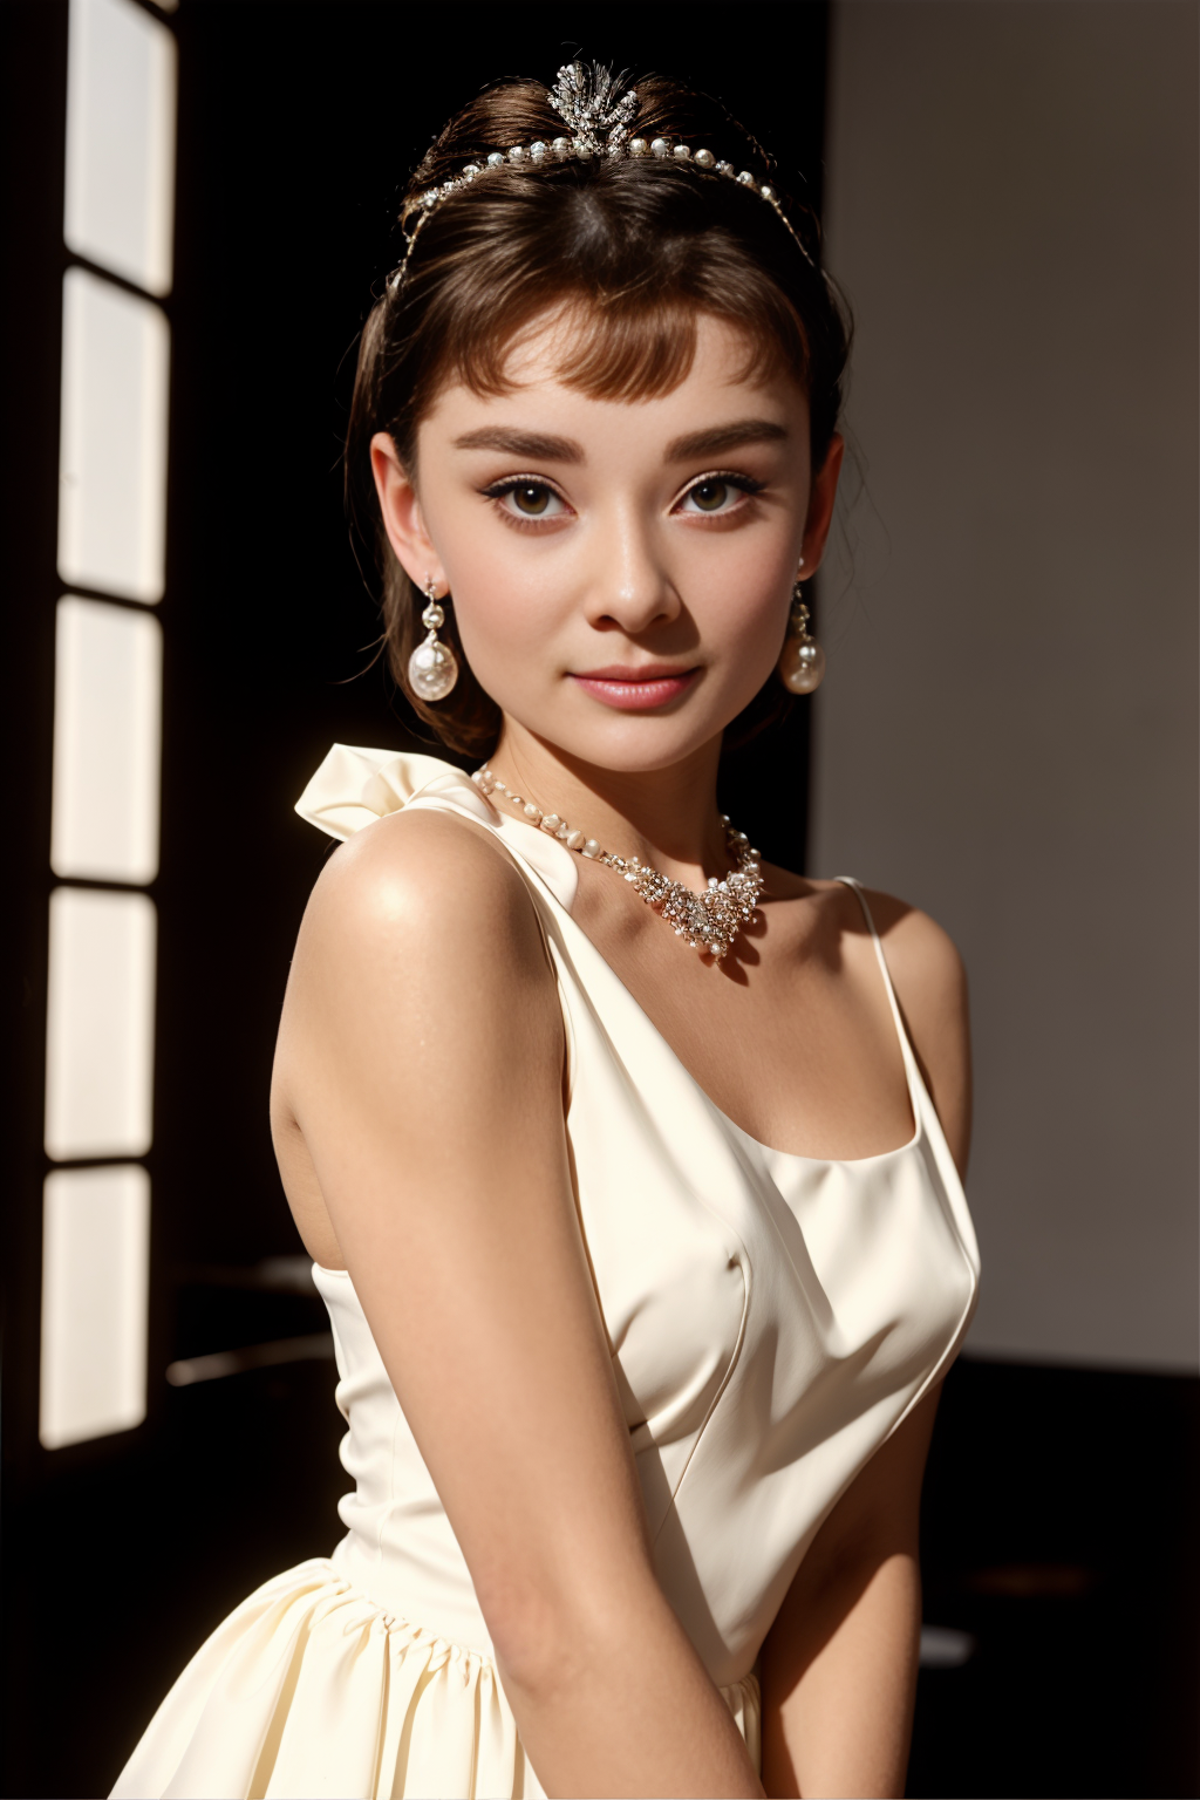 A young woman wearing a white dress and pearl necklace poses for a portrait.